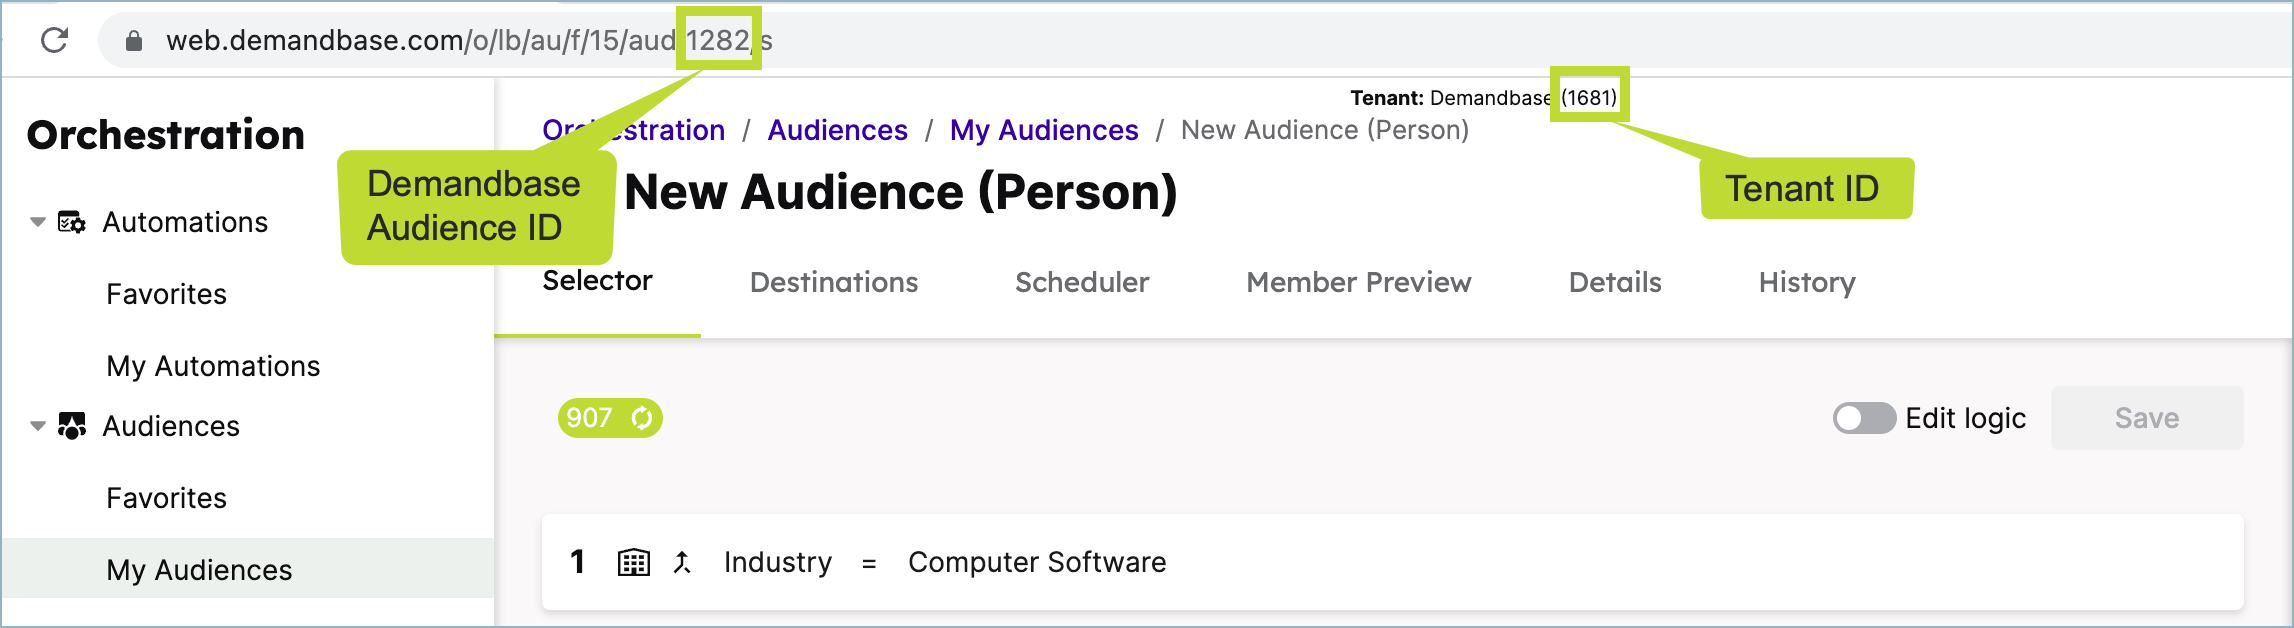 Ad_Network_Audience_Name.png